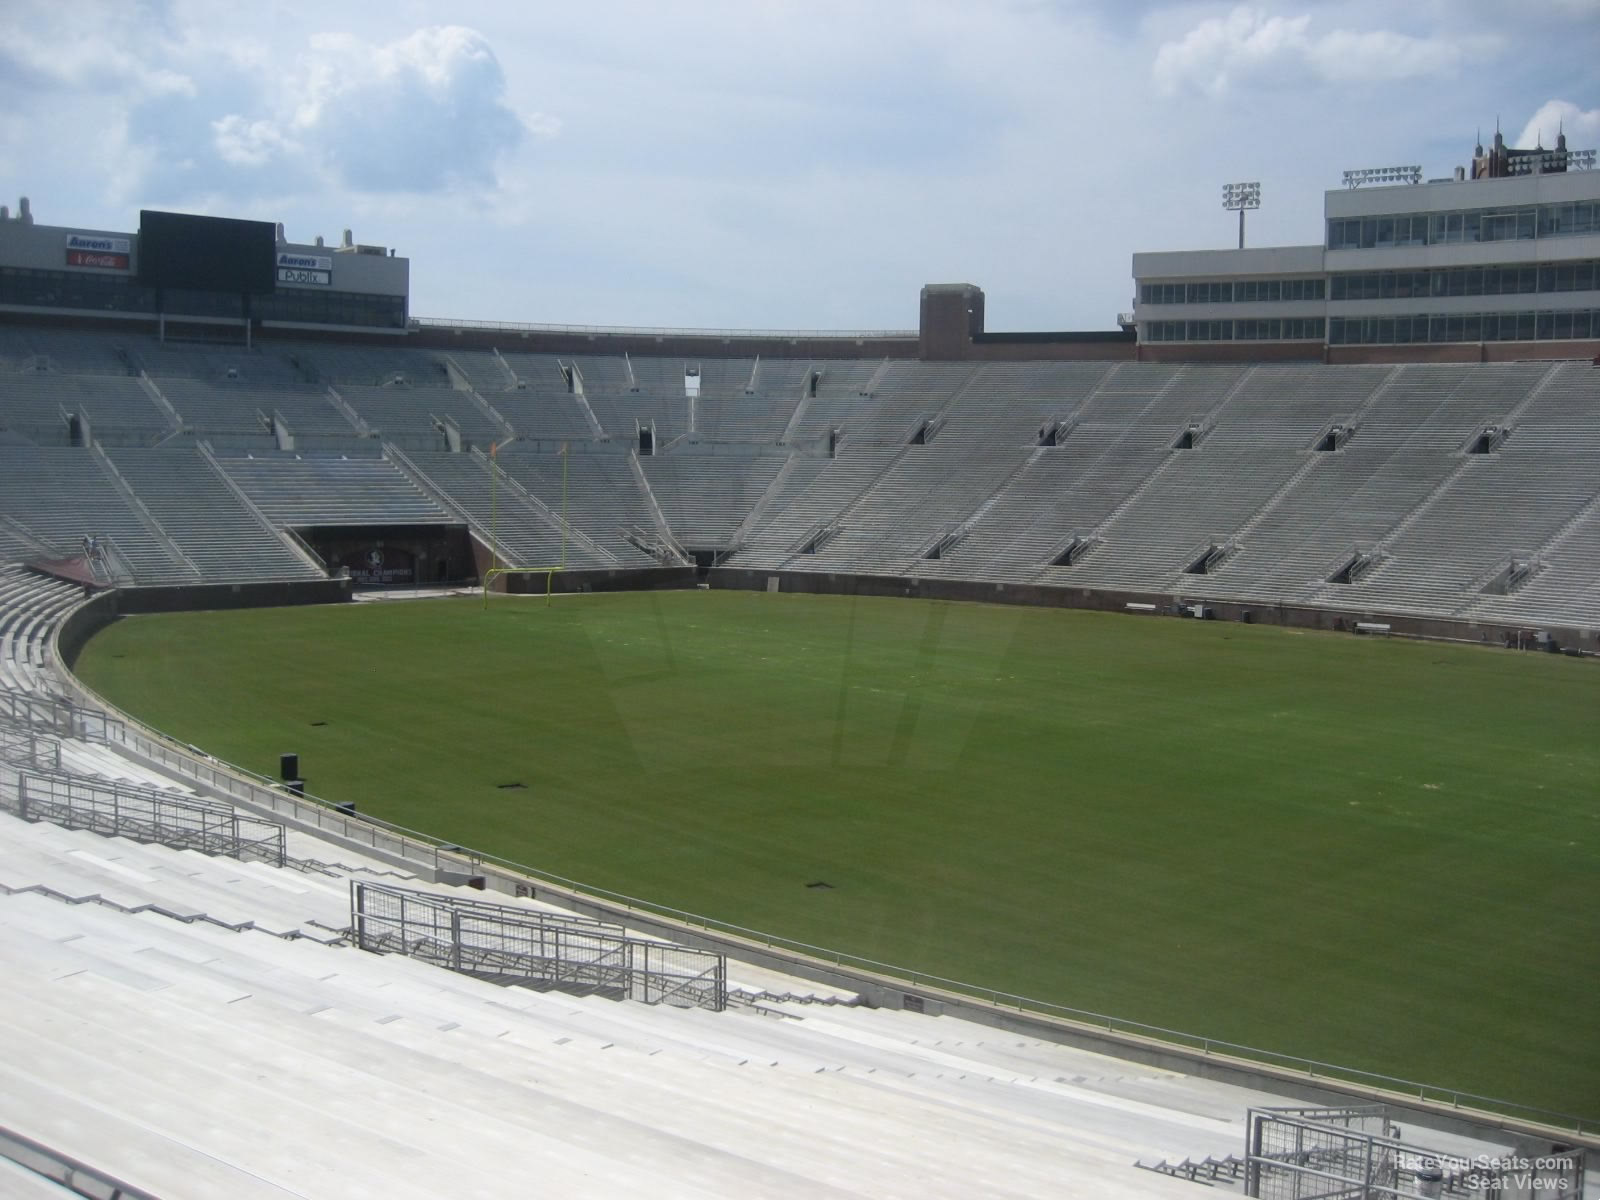 section 6, row 41 seat view  - doak campbell stadium